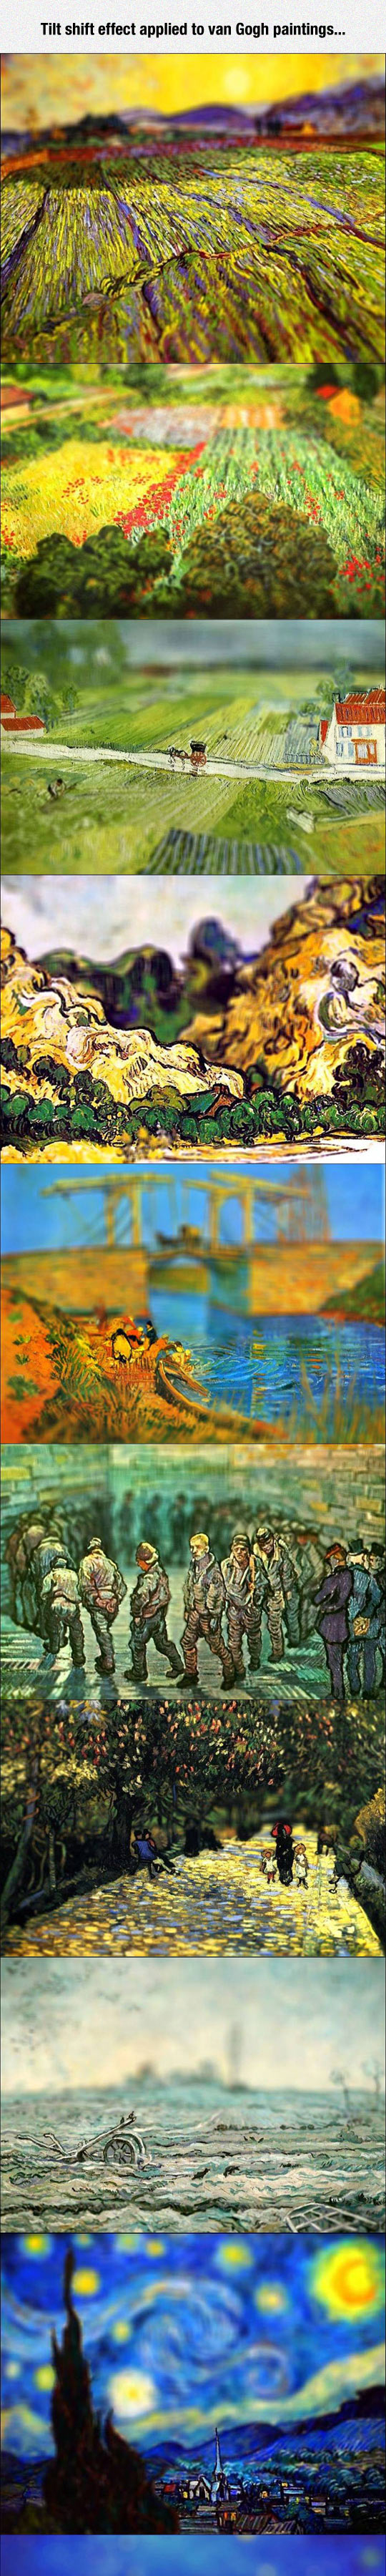 Van Gogh's Work From Another Perspective